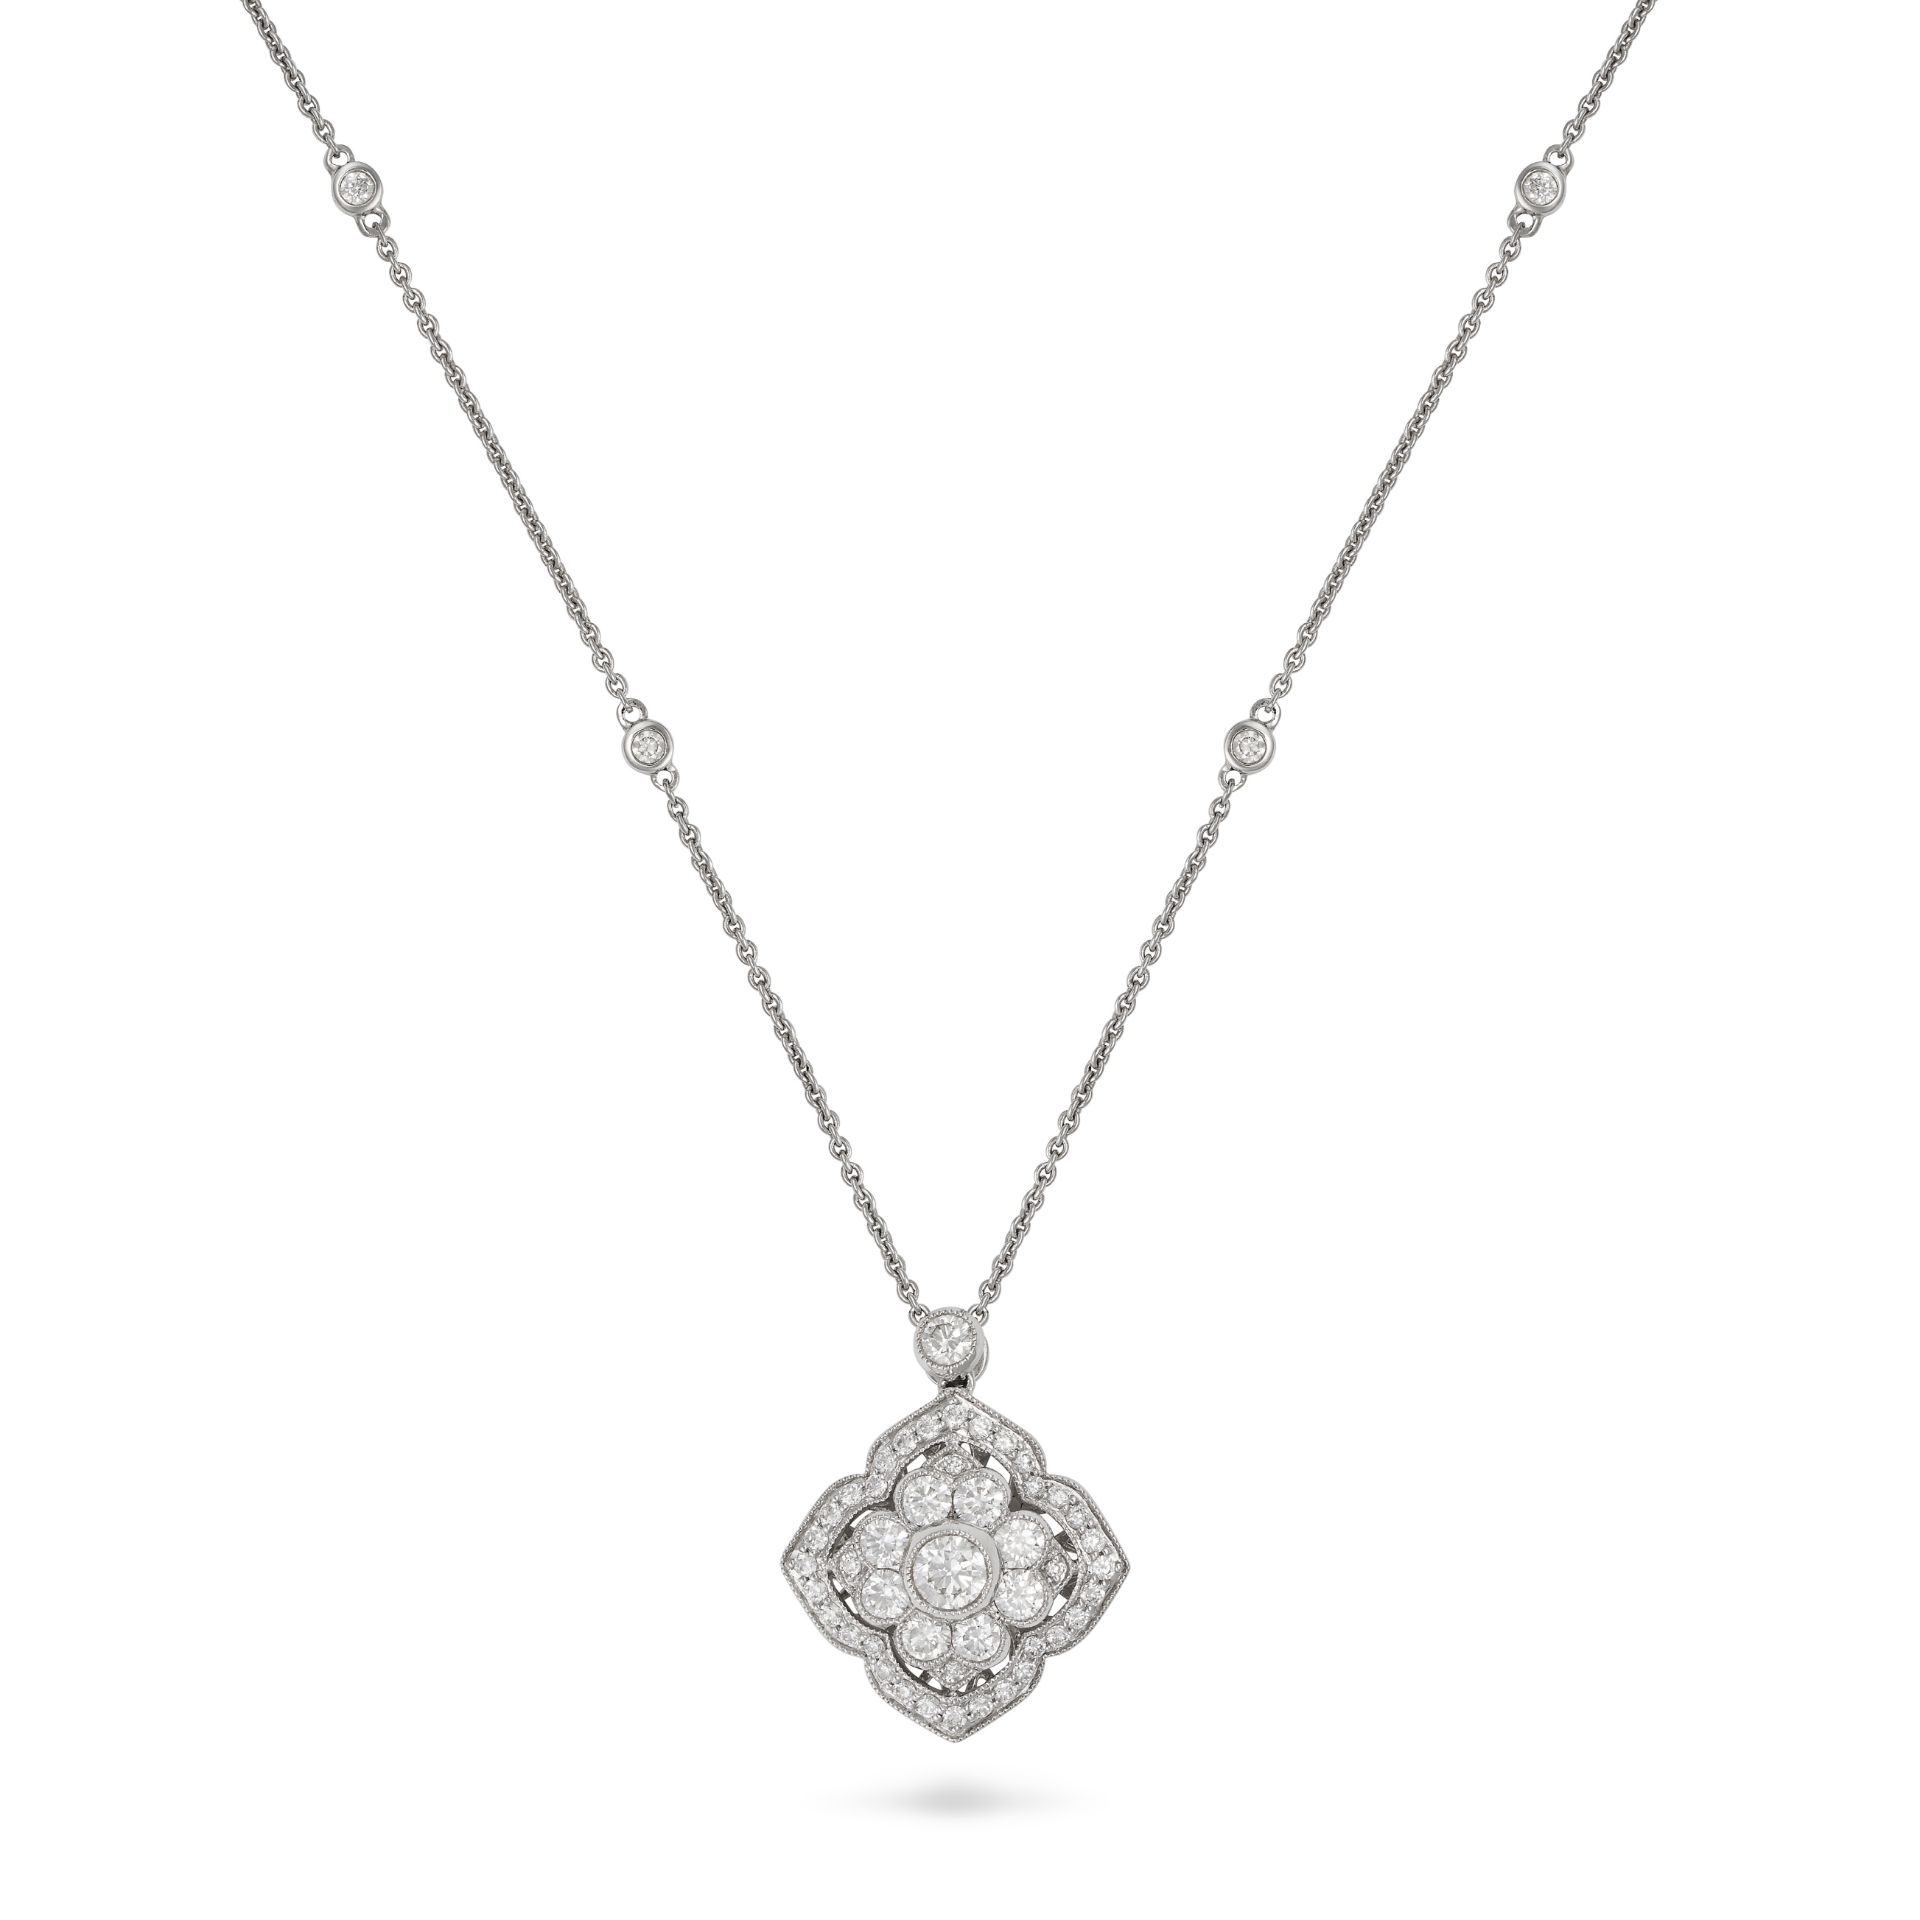 NO RESERVE - A DIAMOND PENDANT NECKLACE in 18ct white gold, the pendant set throughout with round...